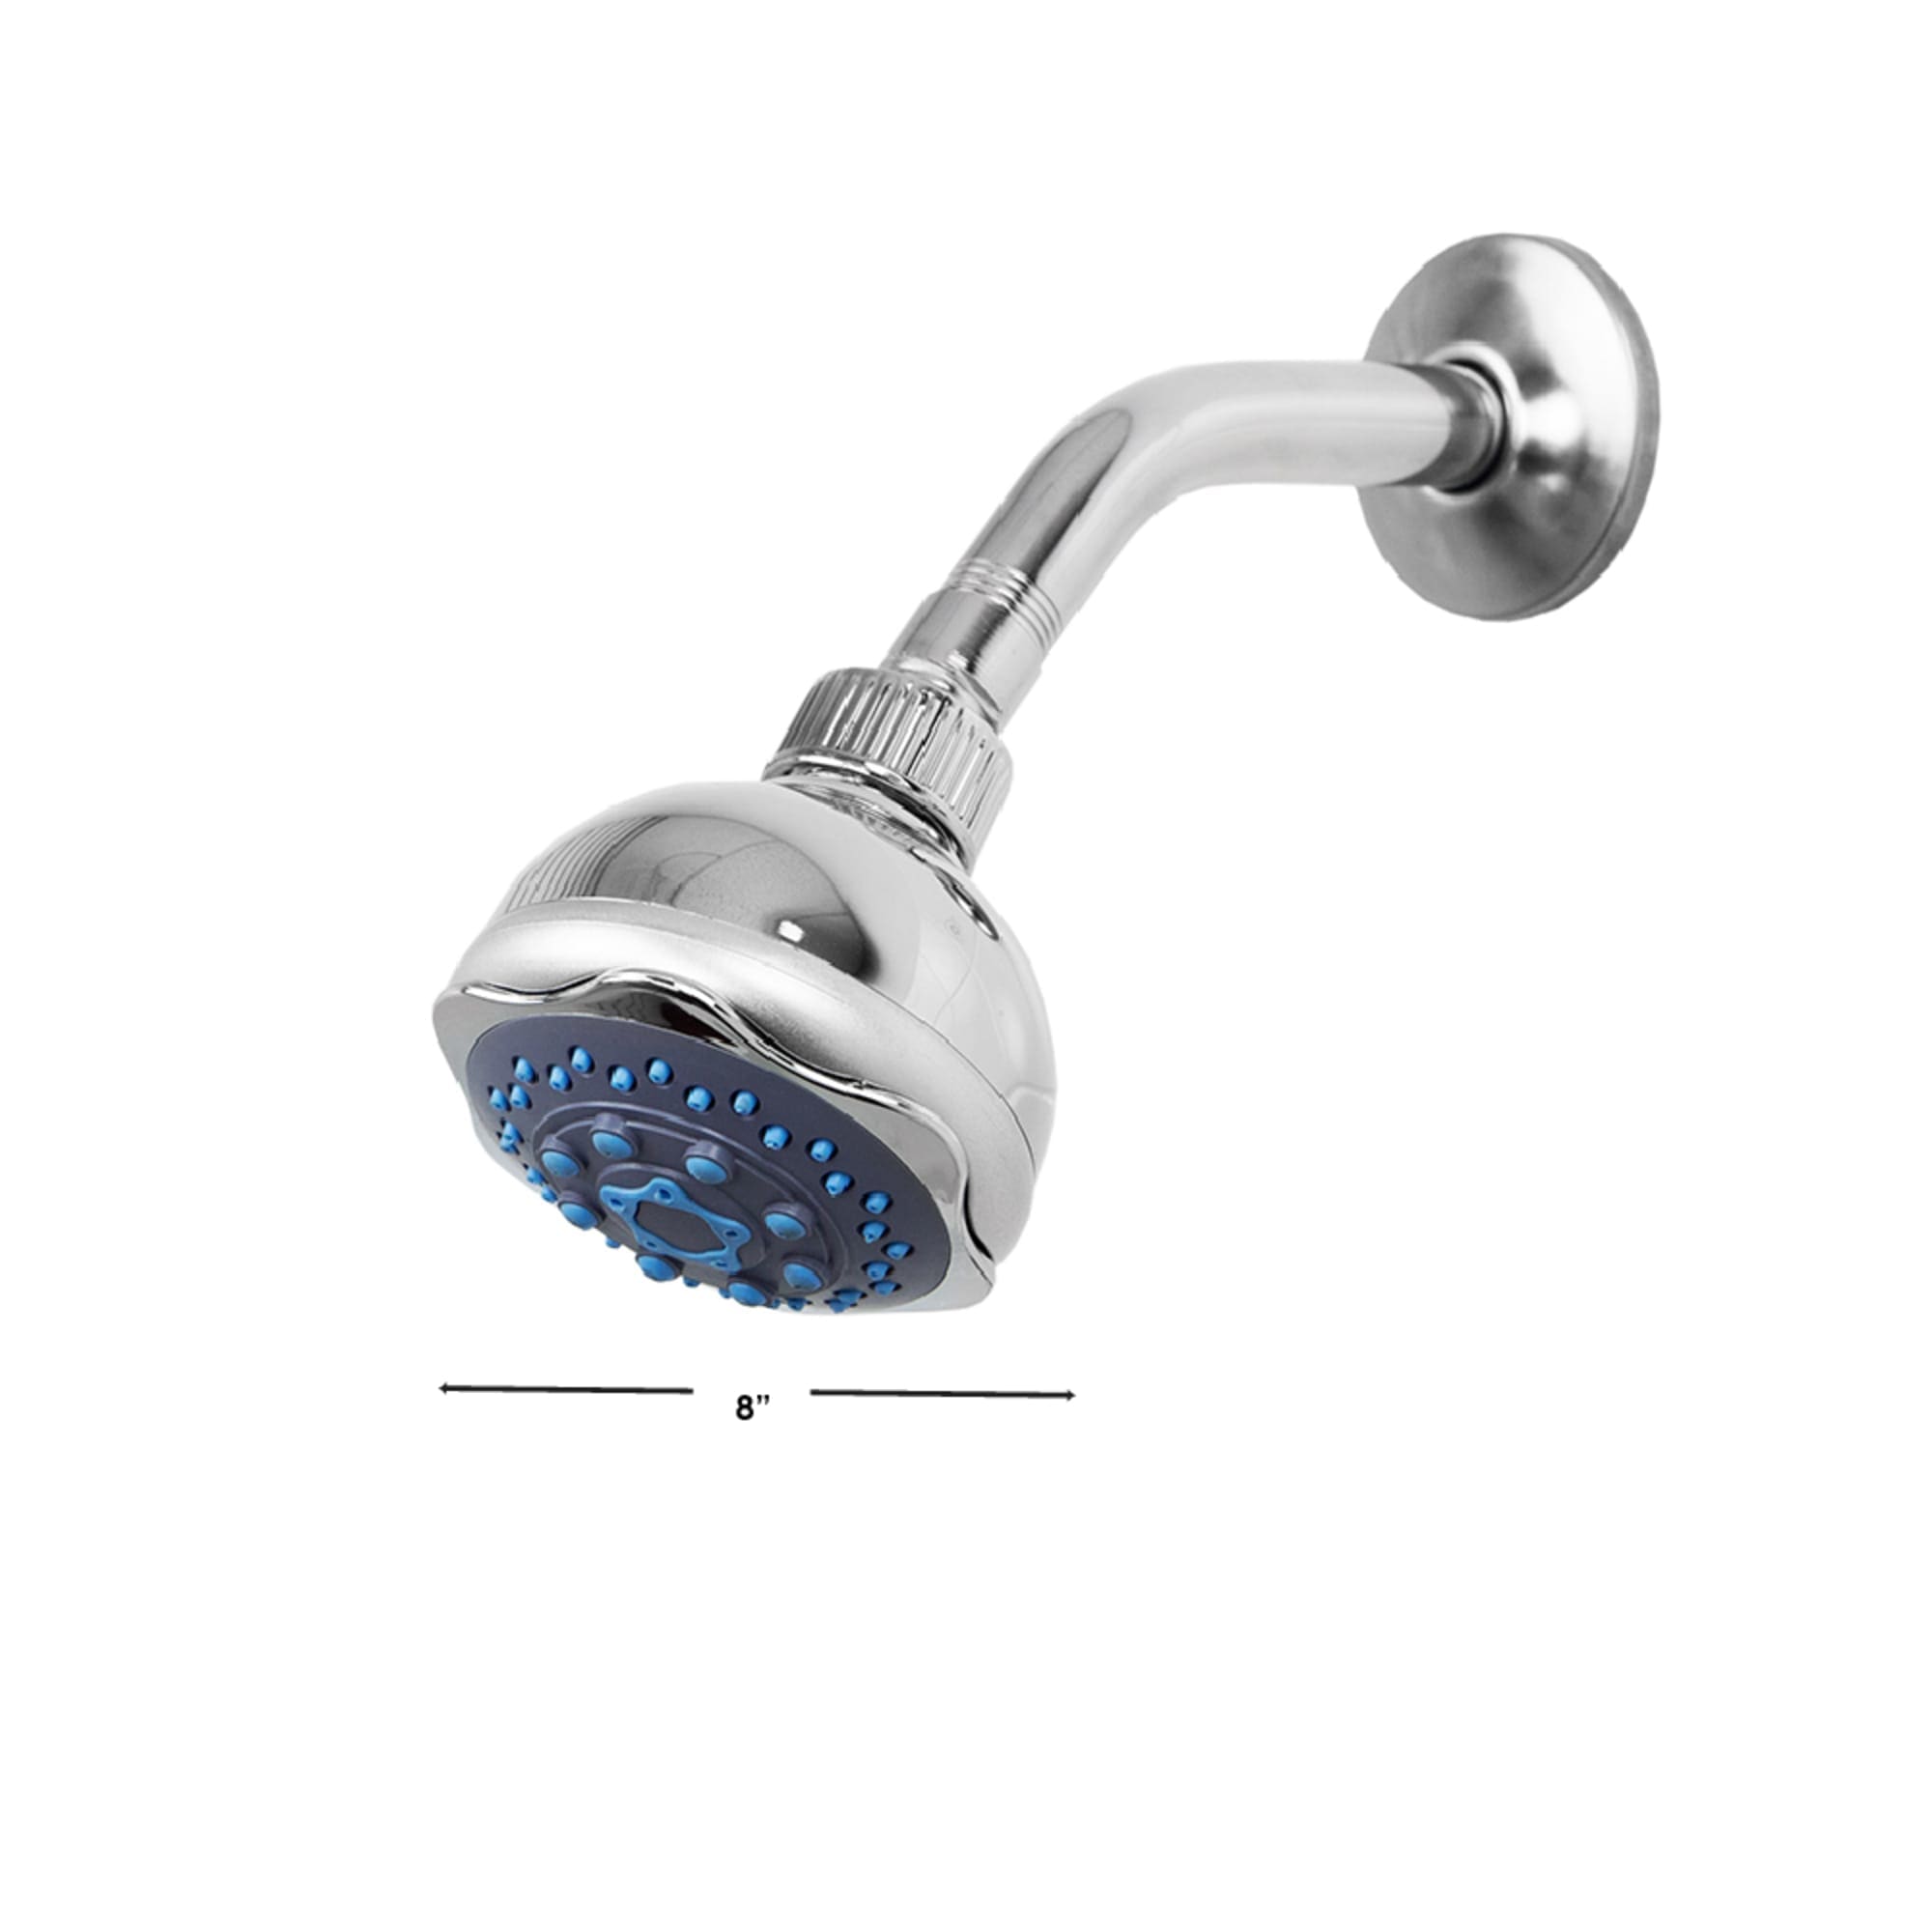 Home Basics 5 Function Chrome Fixed Shower Head $5.00 EACH, CASE PACK OF 12